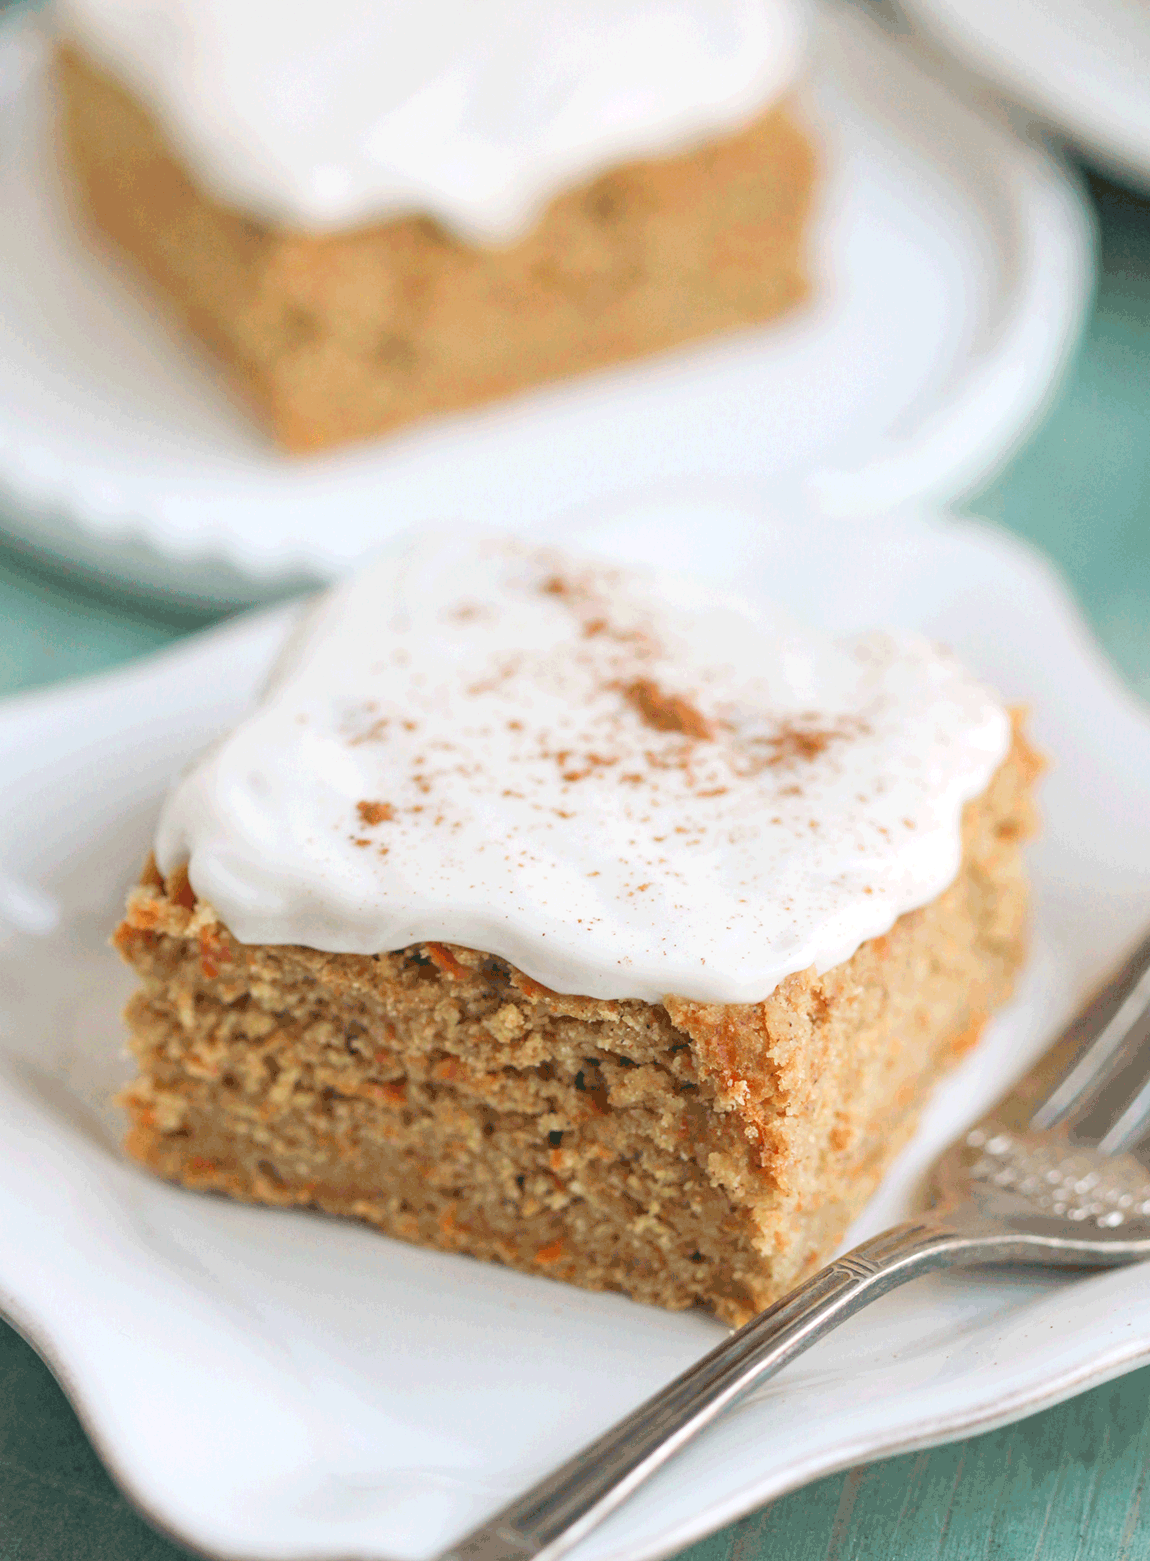 These Healthy Carrot Cake Blondies are sweet, dense, chewy, and PACKED with Carrot Cake flavor. Even with one cup of grated carrots, no one could detect any vegetables! And we definitely wouldn't have ever guessed it's sugar free, low fat, gluten free, and vegan. -- Healthy Dessert Recipes at the Desserts With Benefits Blog (www.DessertsWithBenefits.com)